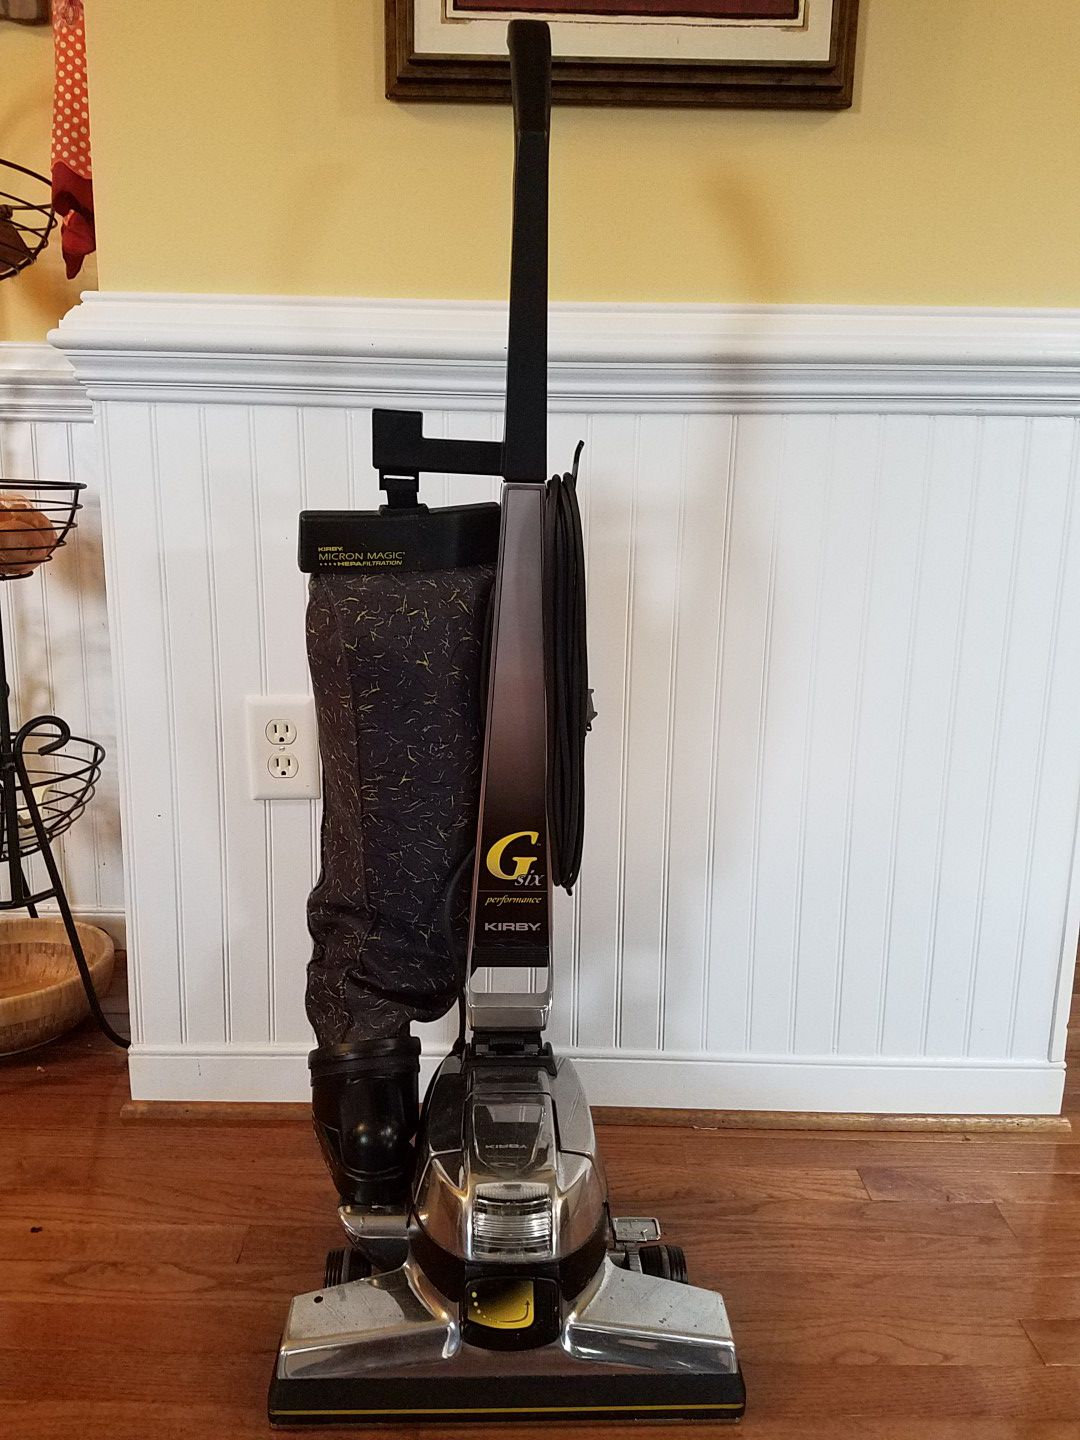 Kirby G 6 upright vacuum cleaner